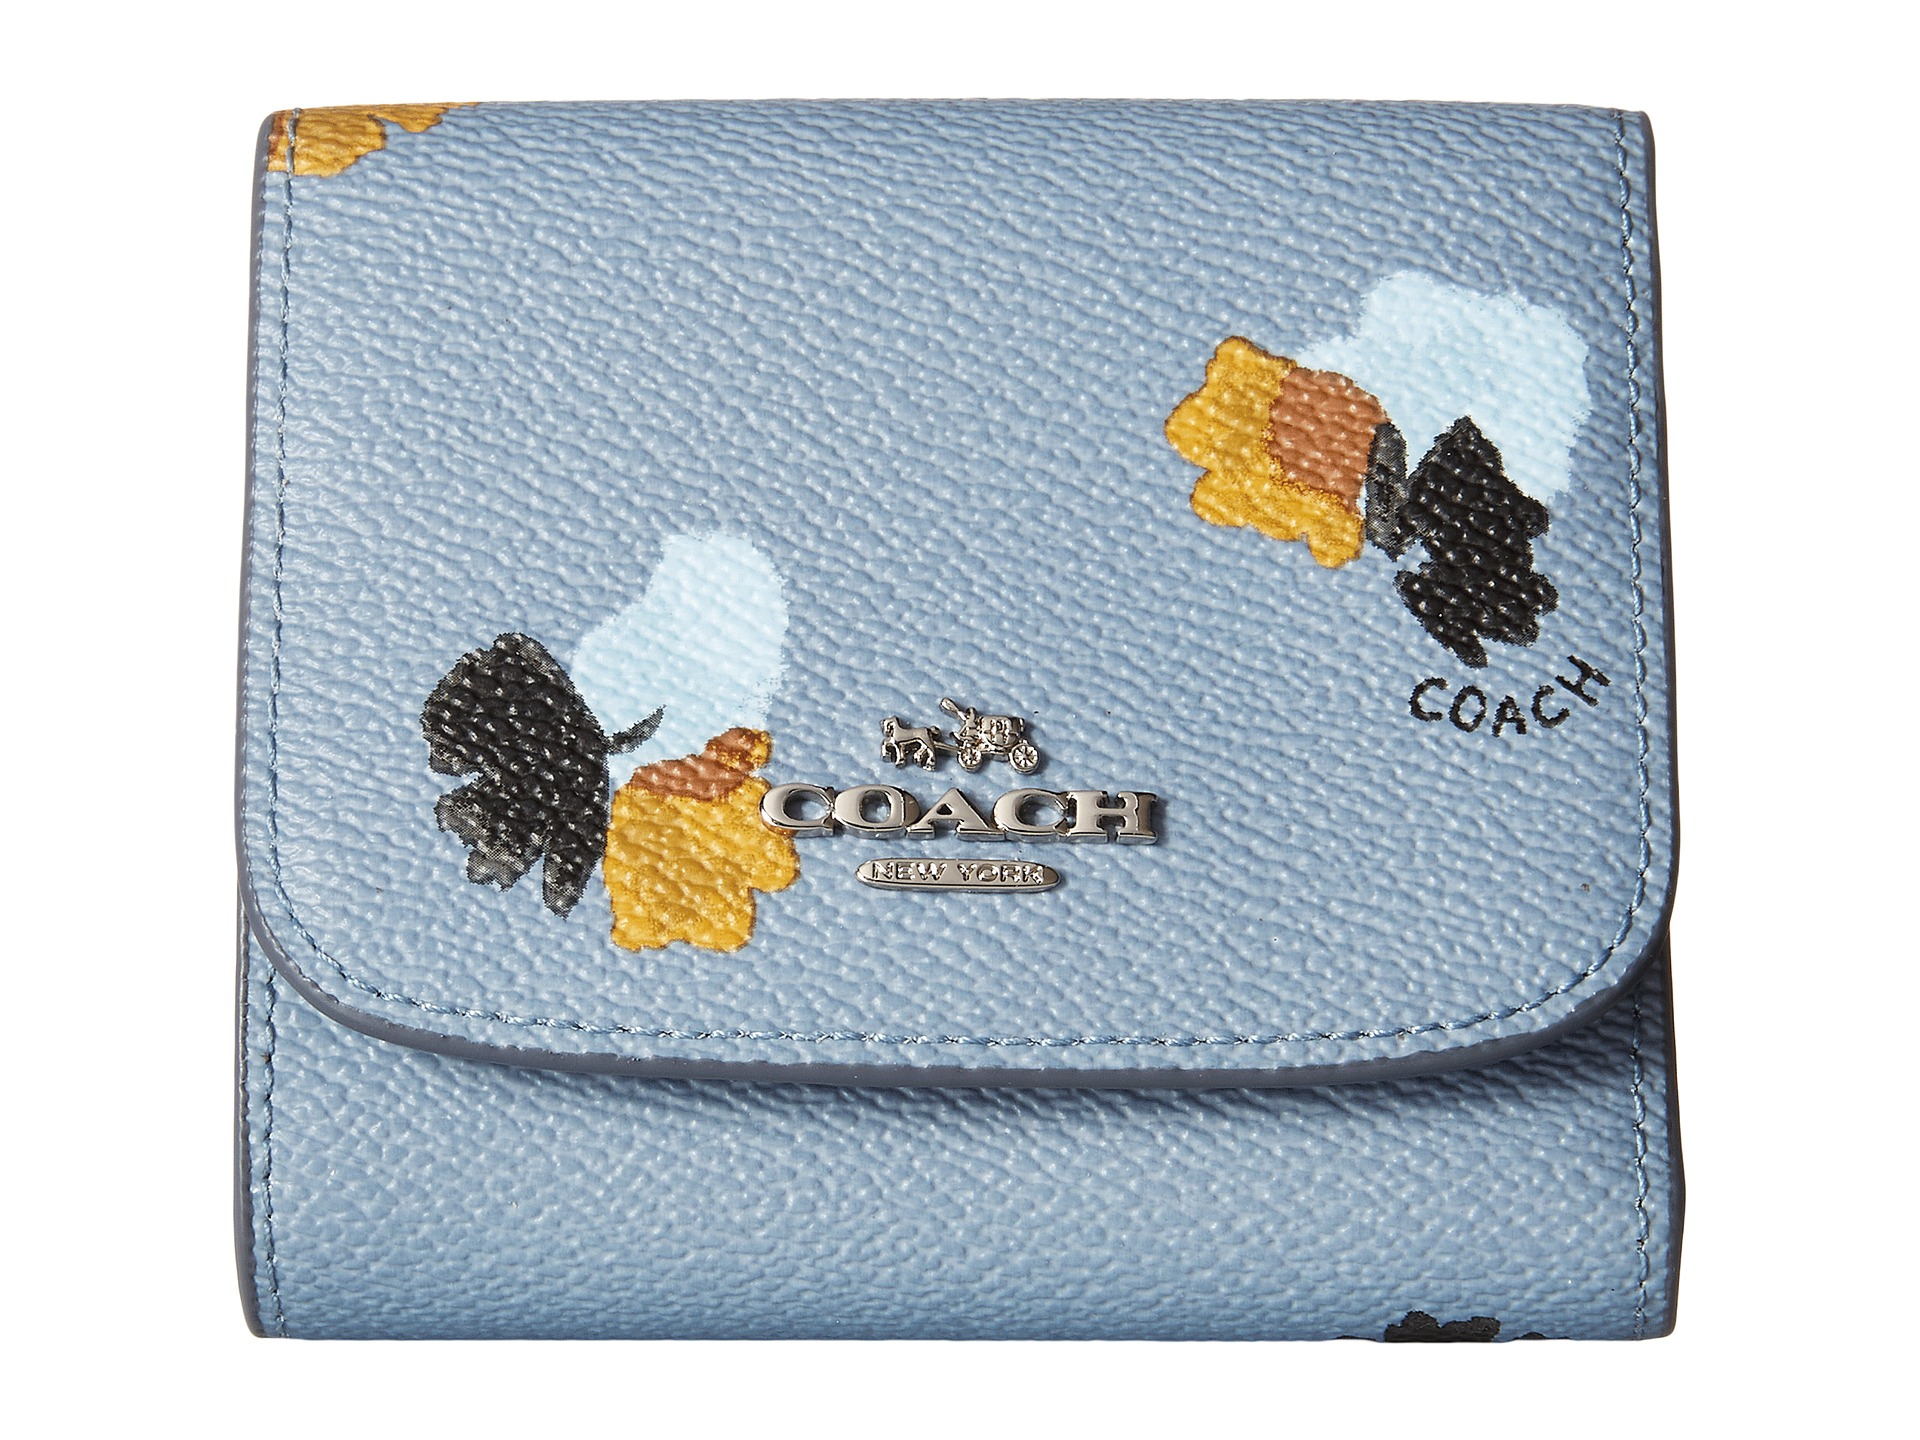 COACH Canvas Small Wallet - Lyst